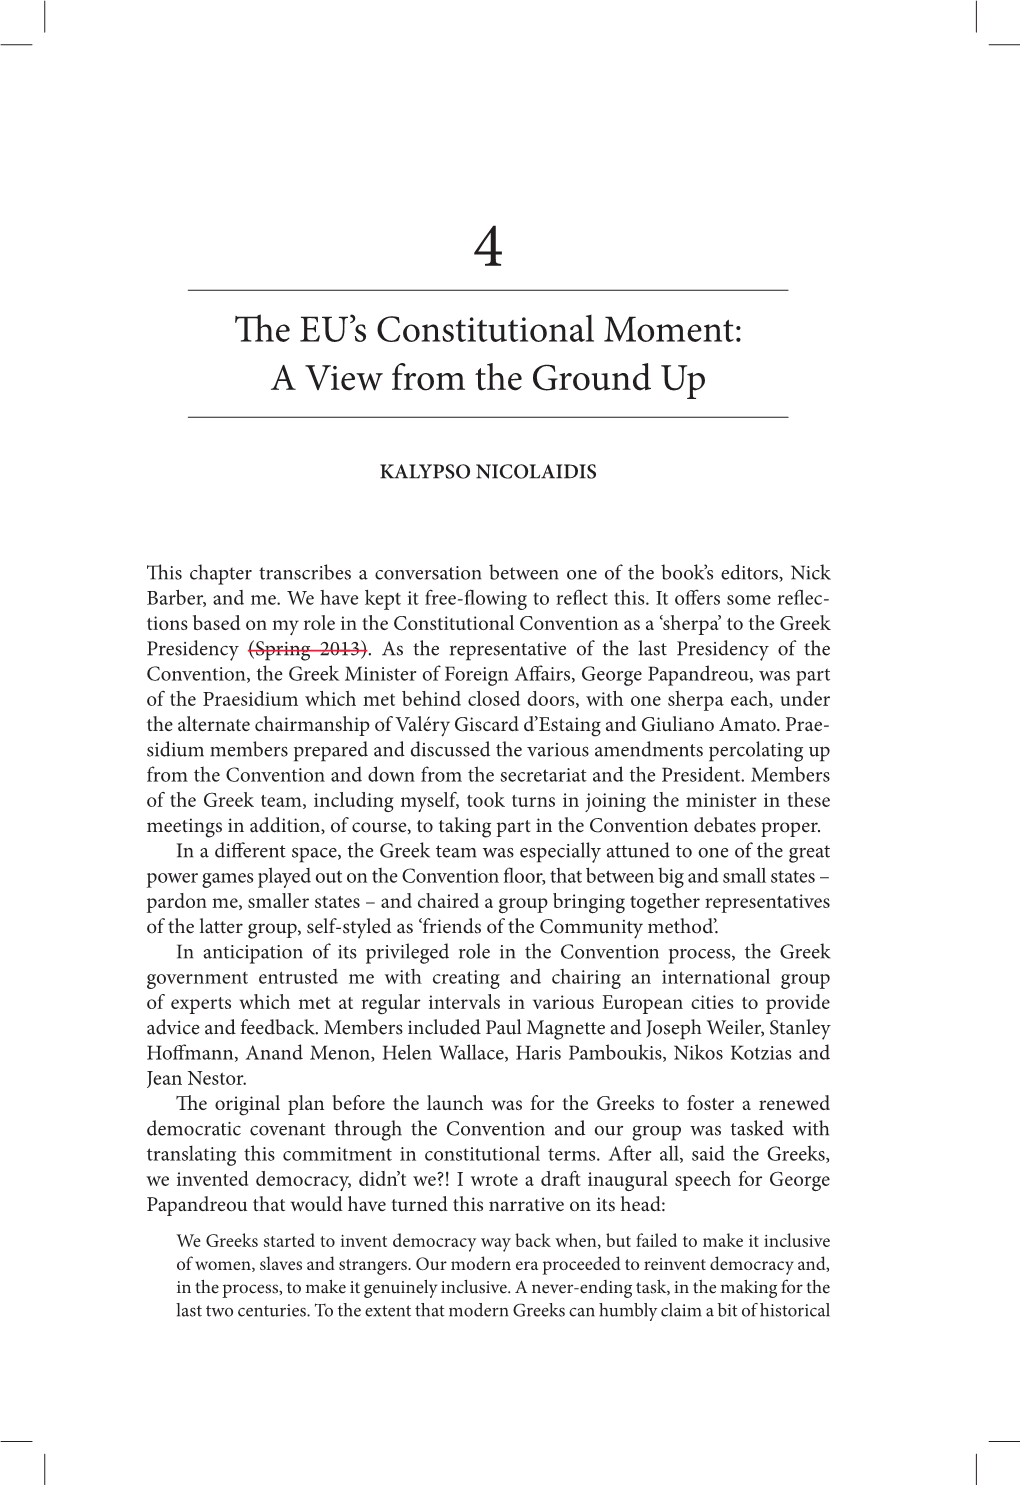 The EU ' S Constitutional Moment: a View from the Ground Up